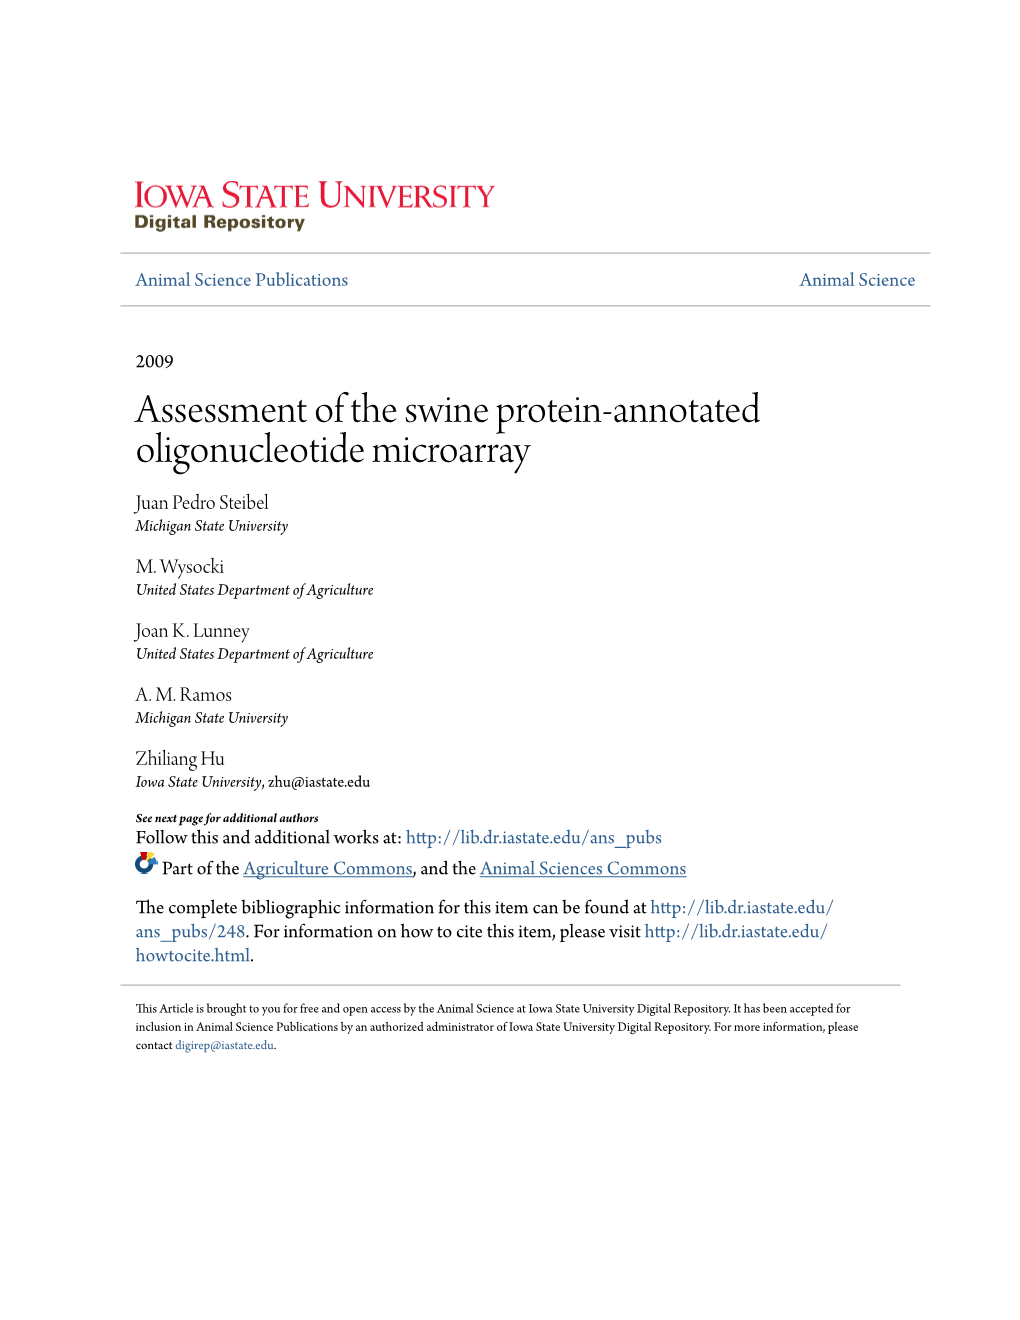 Assessment of the Swine Protein-Annotated Oligonucleotide Microarray Juan Pedro Steibel Michigan State University